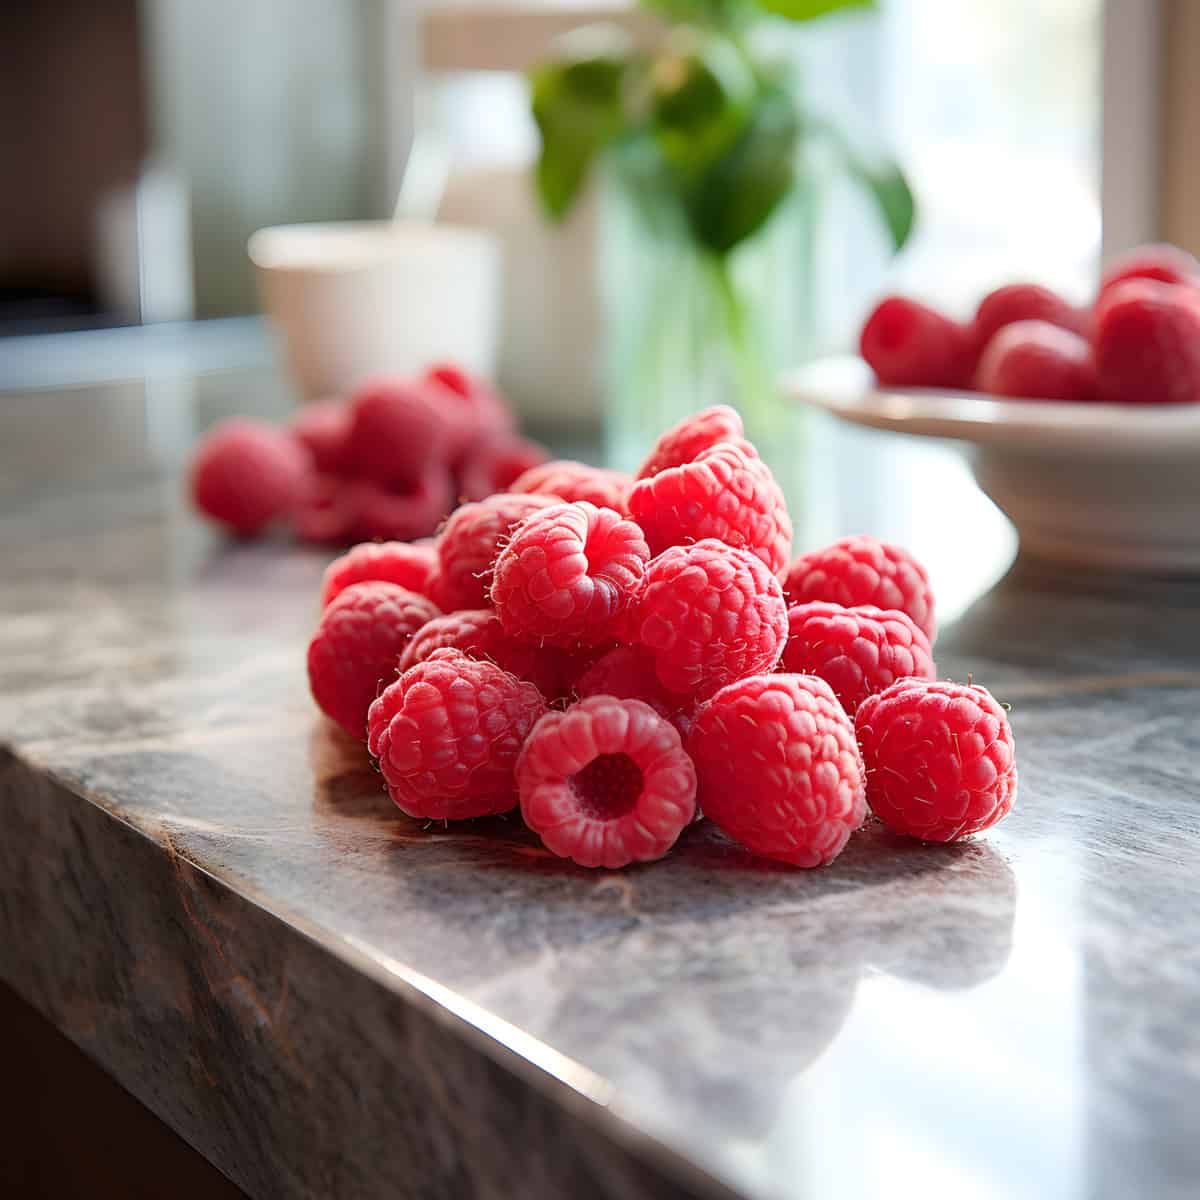 Delicious Raspberries on a kitchen counter